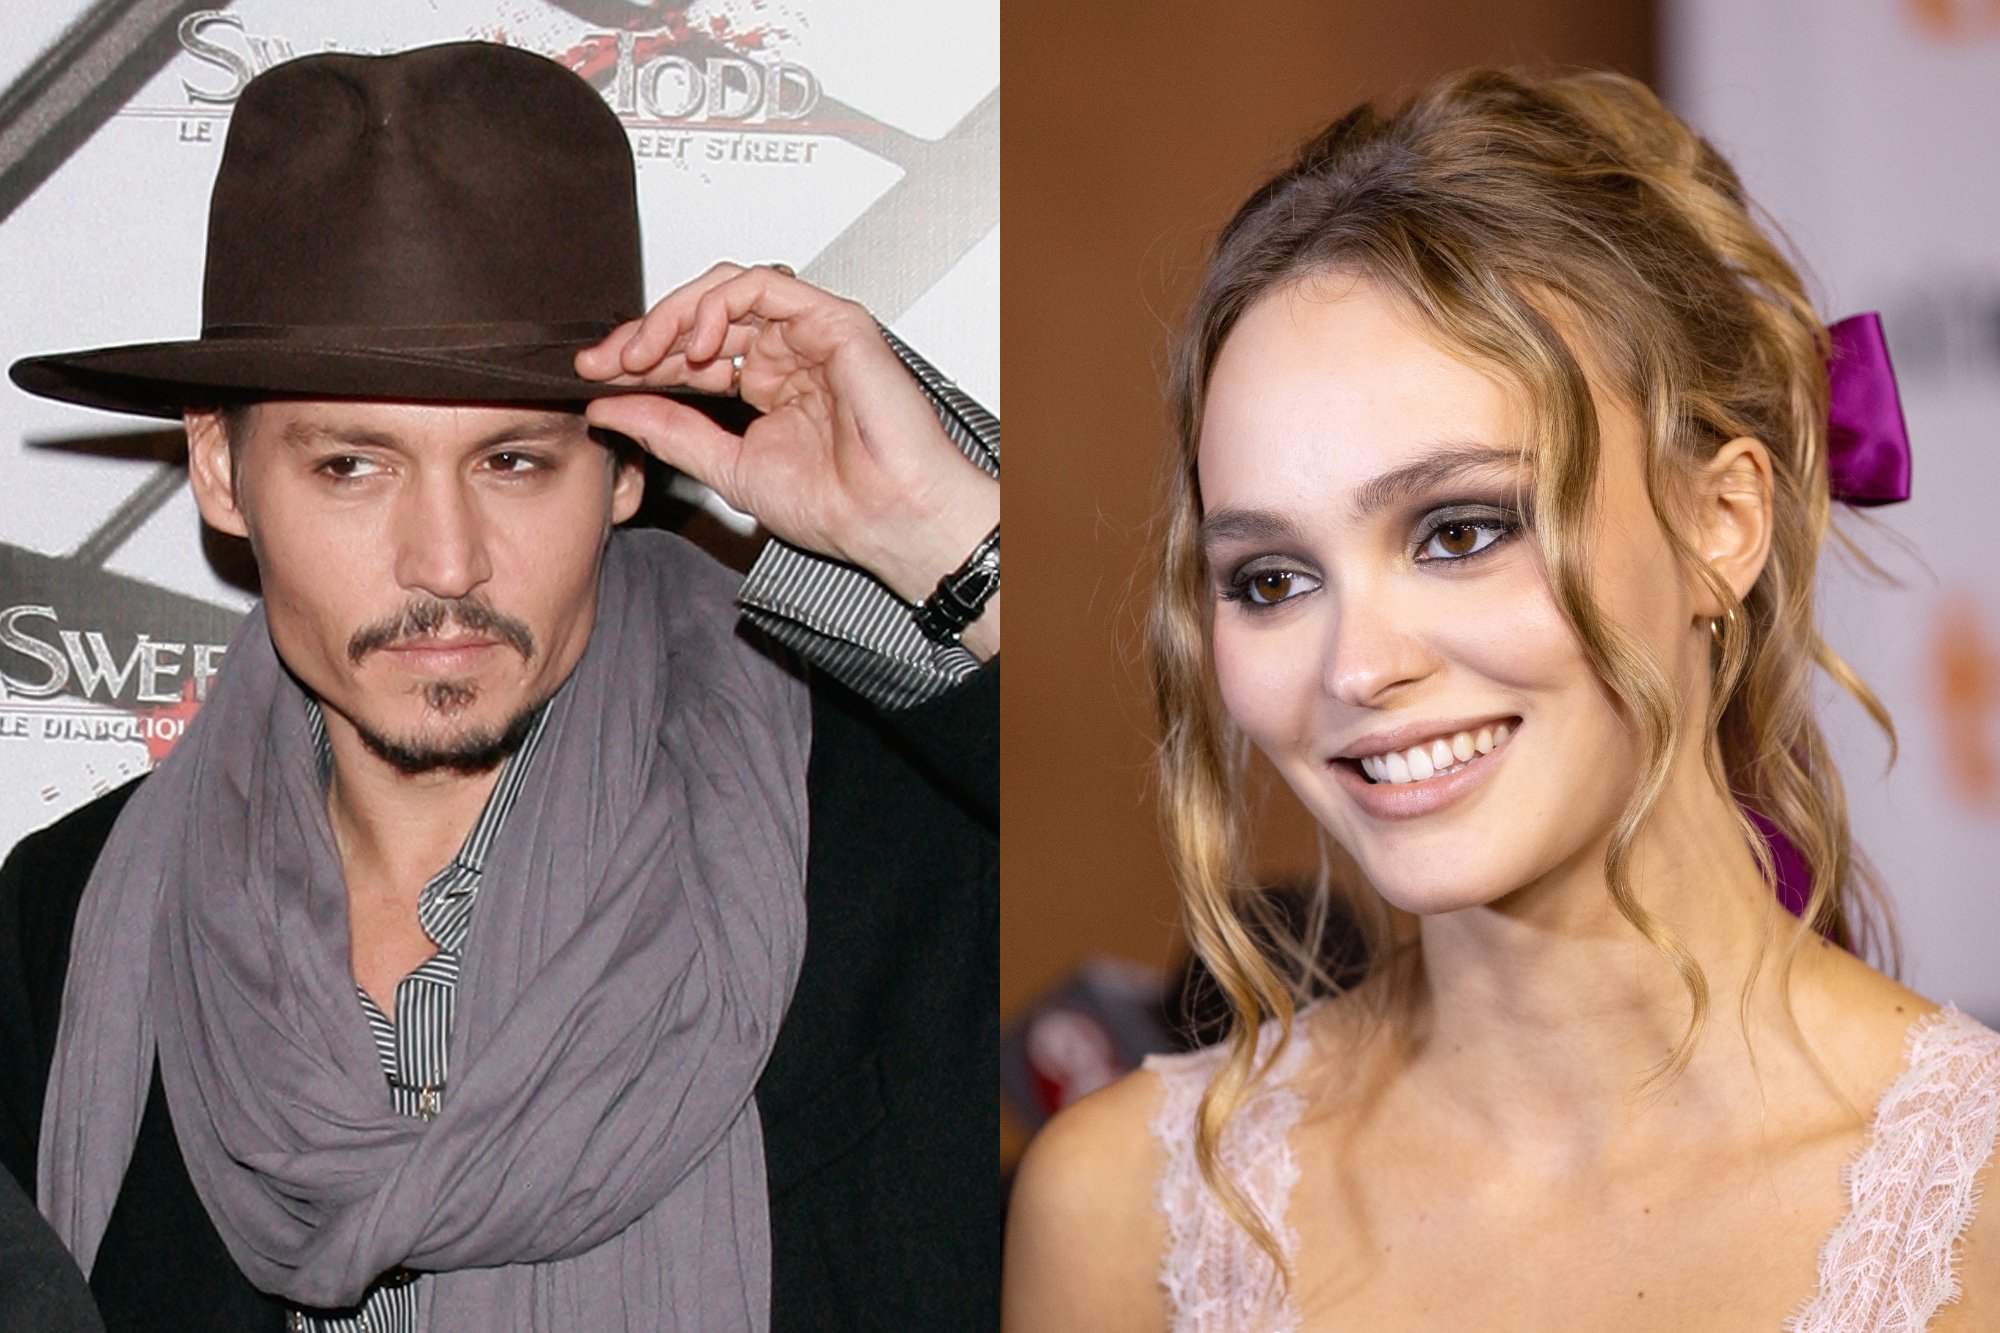 'Sweeney Todd' star Johnny Depp and Lily-Rose Depp with Johnny wearing a hat with a 'Sweeney Todd' step and repeat and Lily-Rose smiling with a white-strapped dress